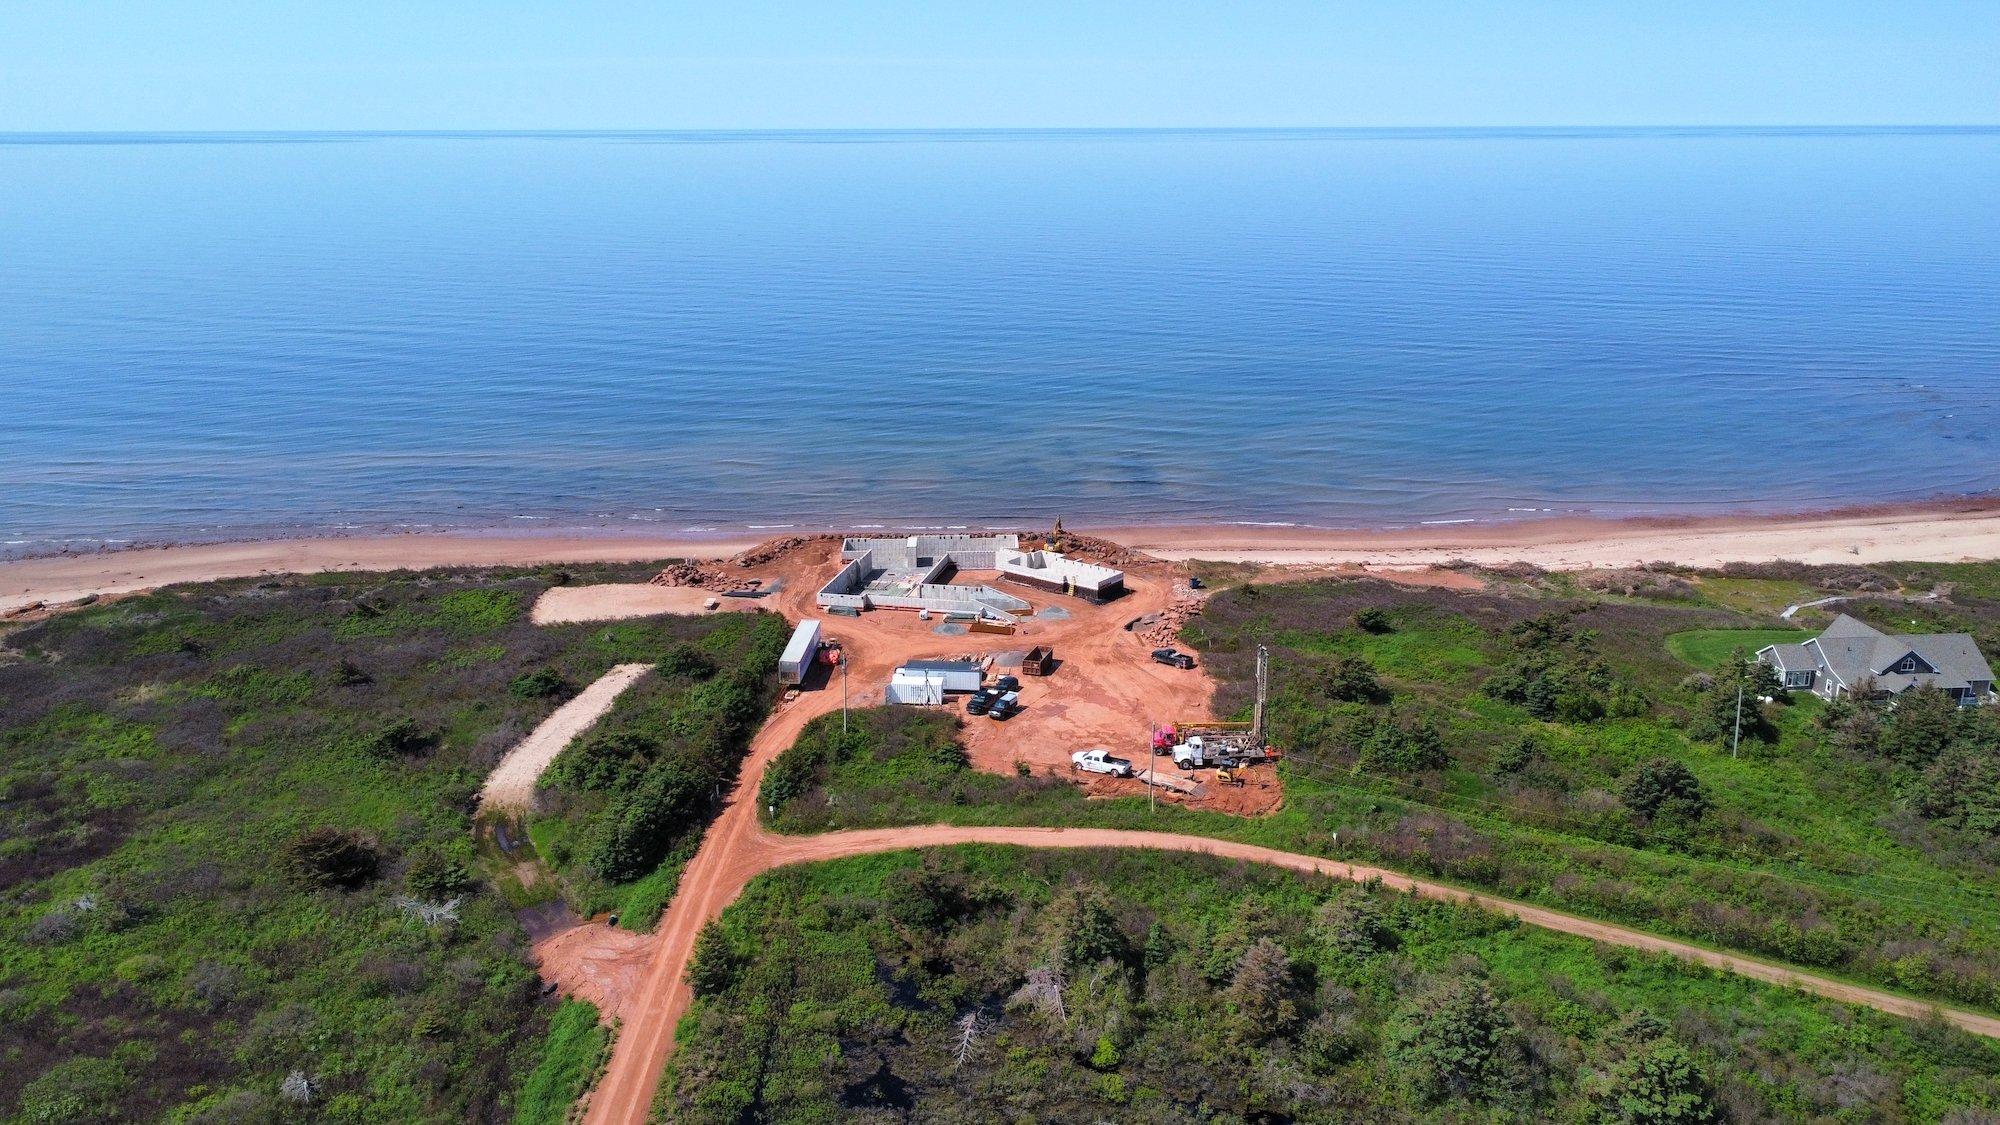 An incomplete compound under construction, with blue ocean in the background and forested areas in the foreground.